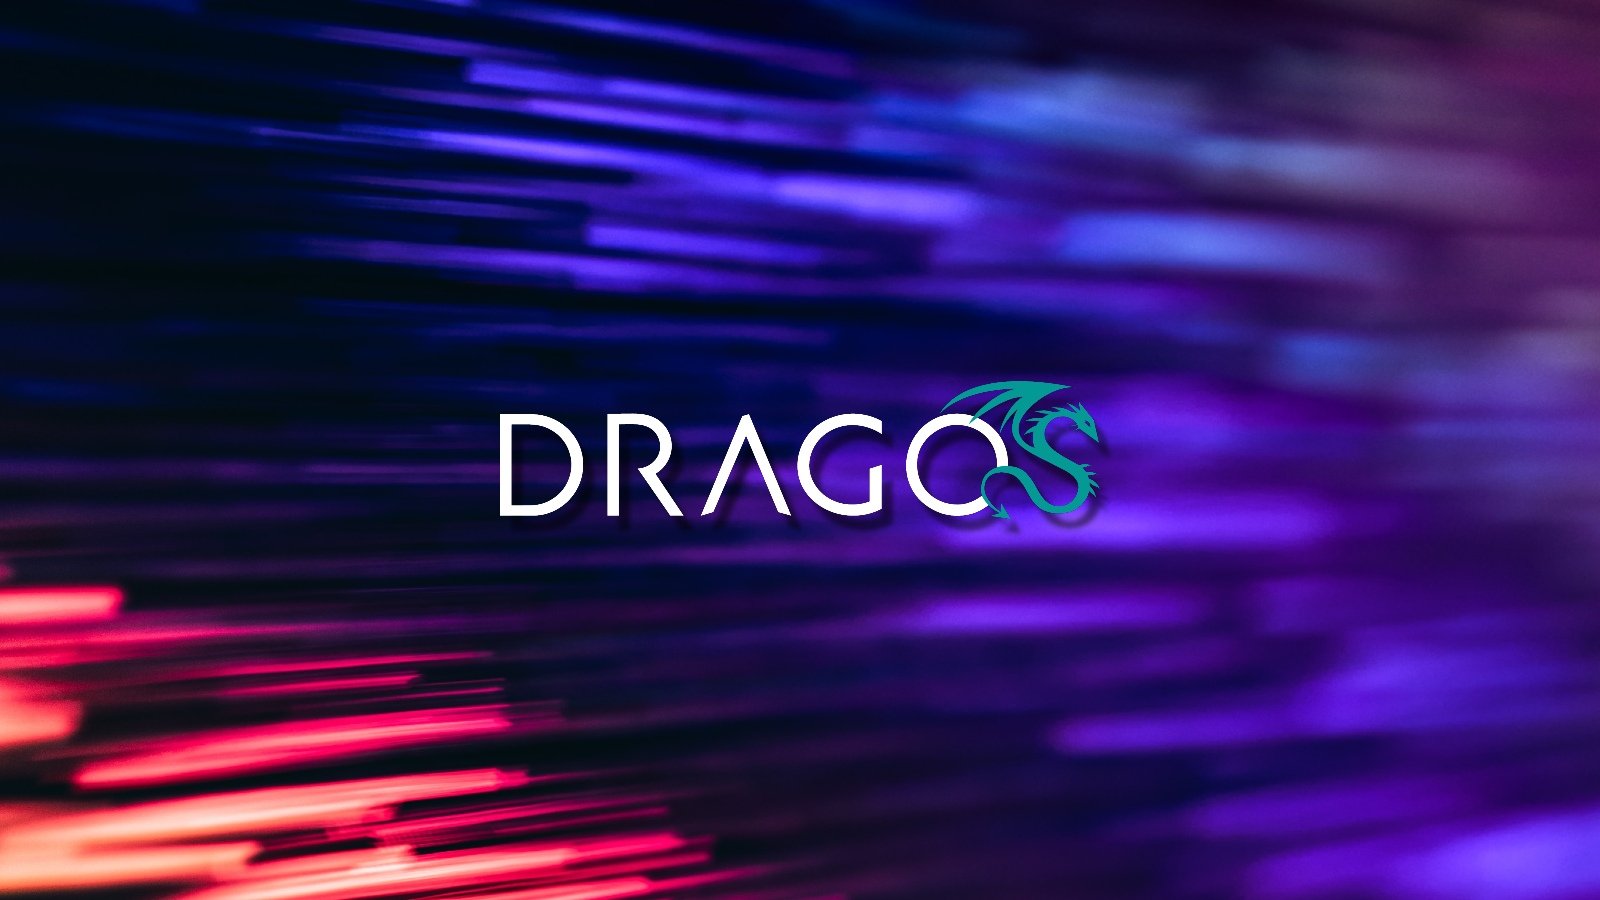 Cybersecurity firm Dragos shared details about a failed extortion attempt it suffered